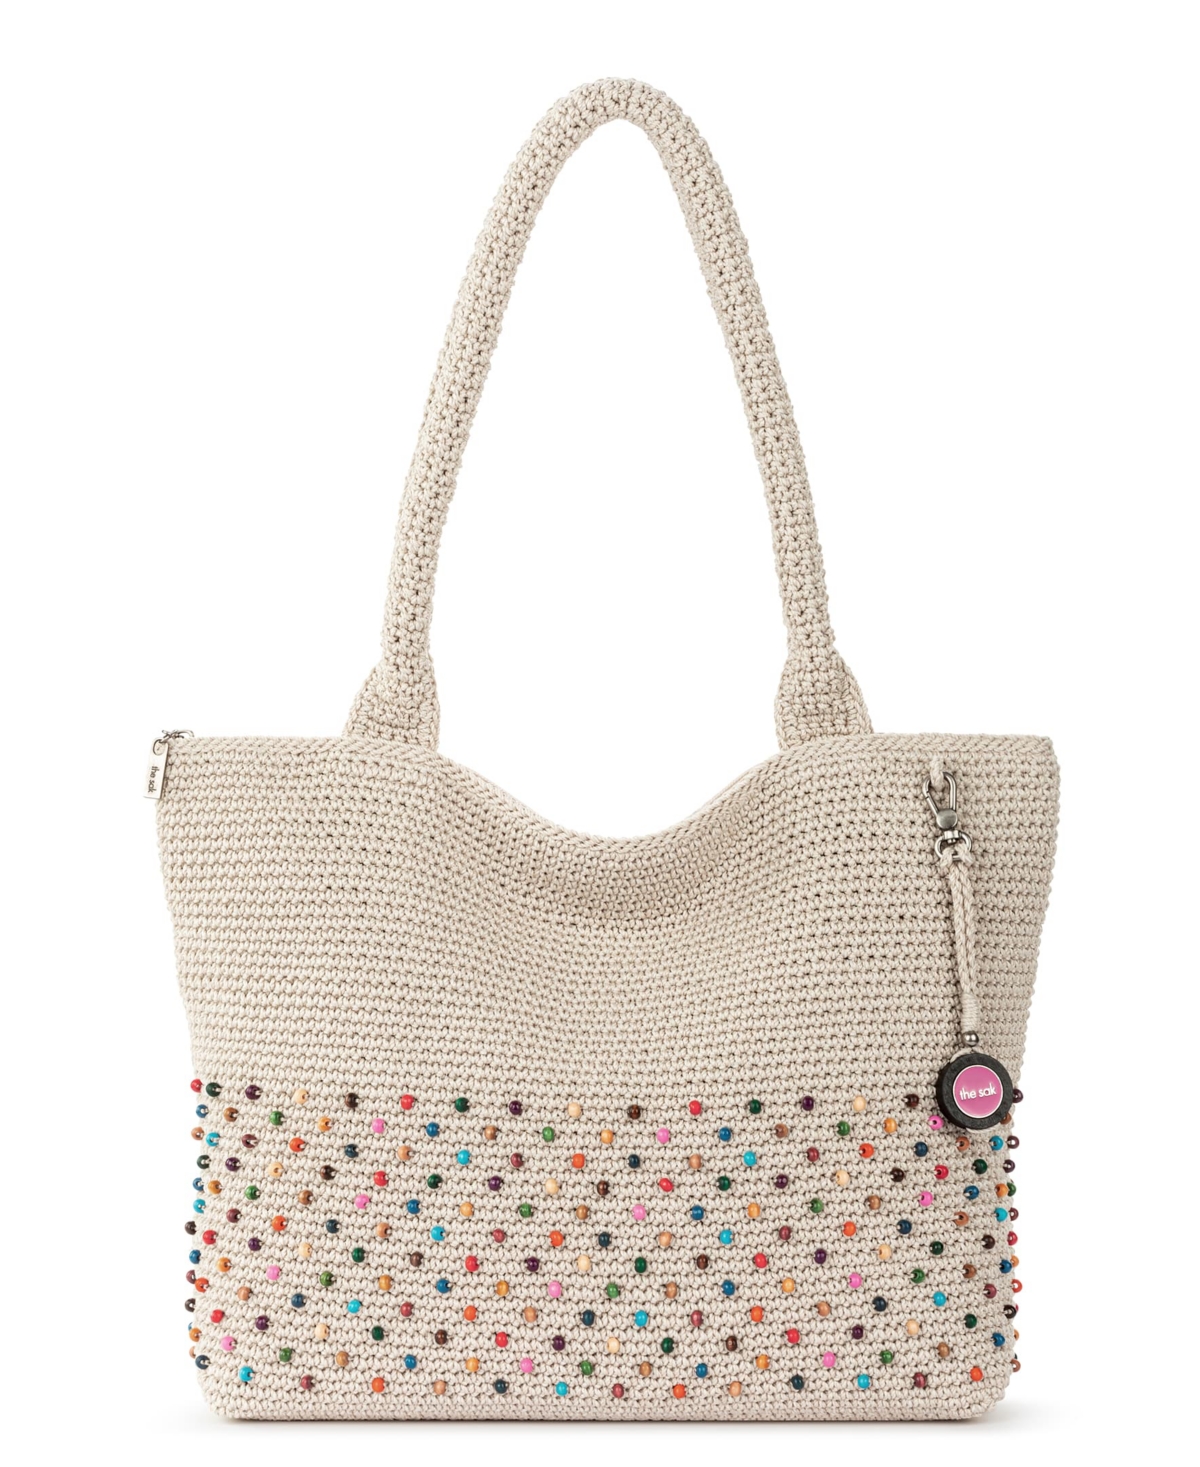 Crafted Classics Crochet Extra-Large Carryall Tote - Ecru Multi Beads